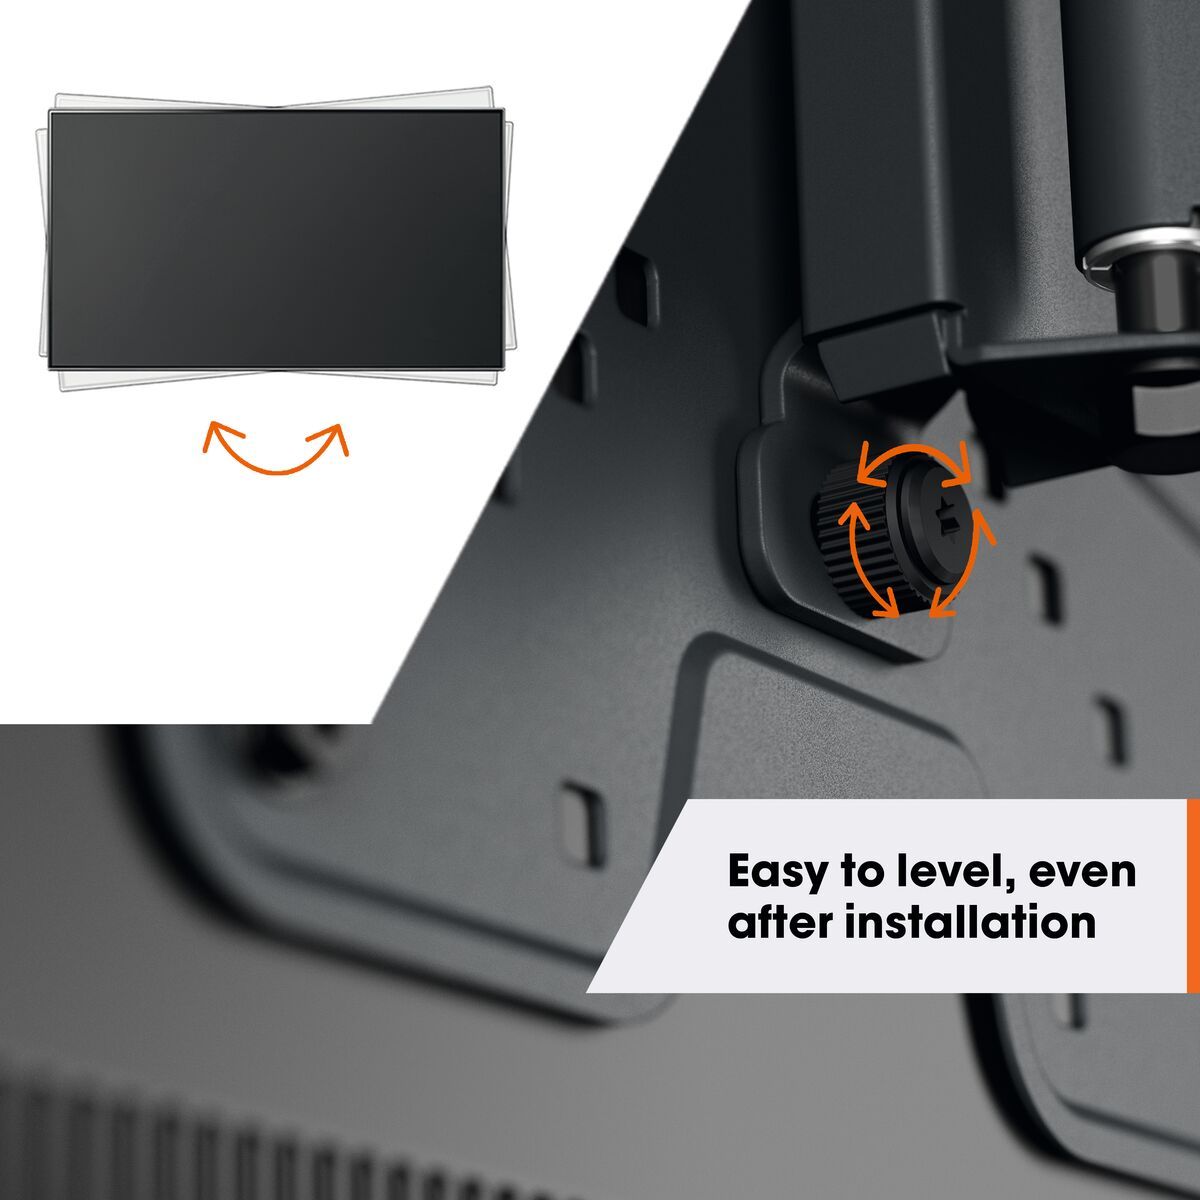 Vogel's TVM 1423 Full-Motion TV Wall Mount - Suitable for 32 up to 65 inch TVs - Up to 120° swivel - Tilt up to 15° - USP